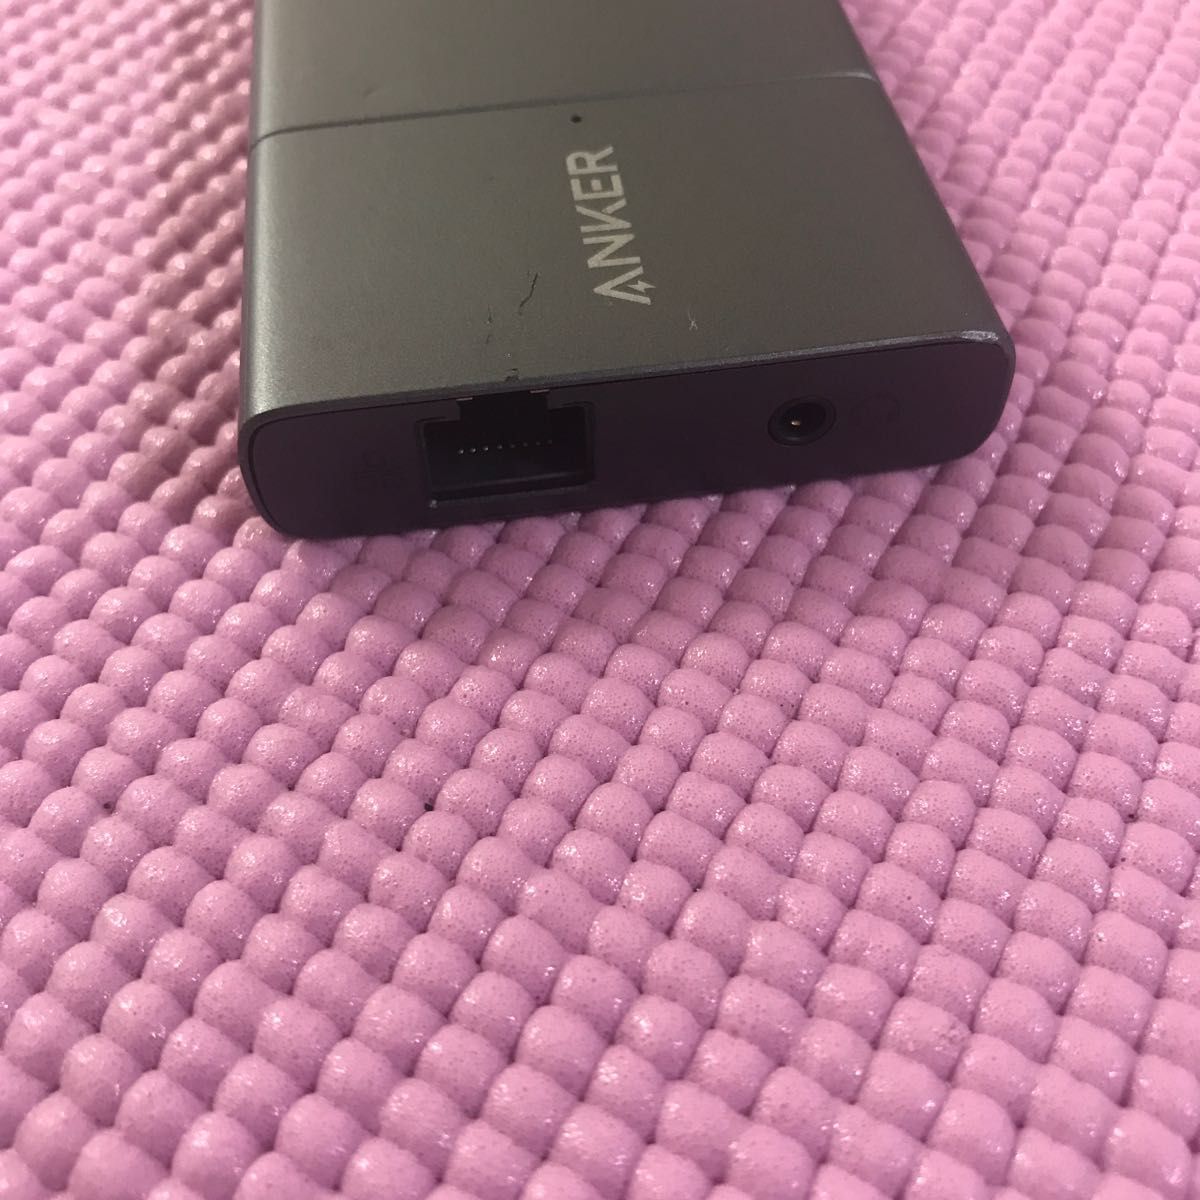 Anker PowerExpand 11-in-1 USB-C PD ハブ